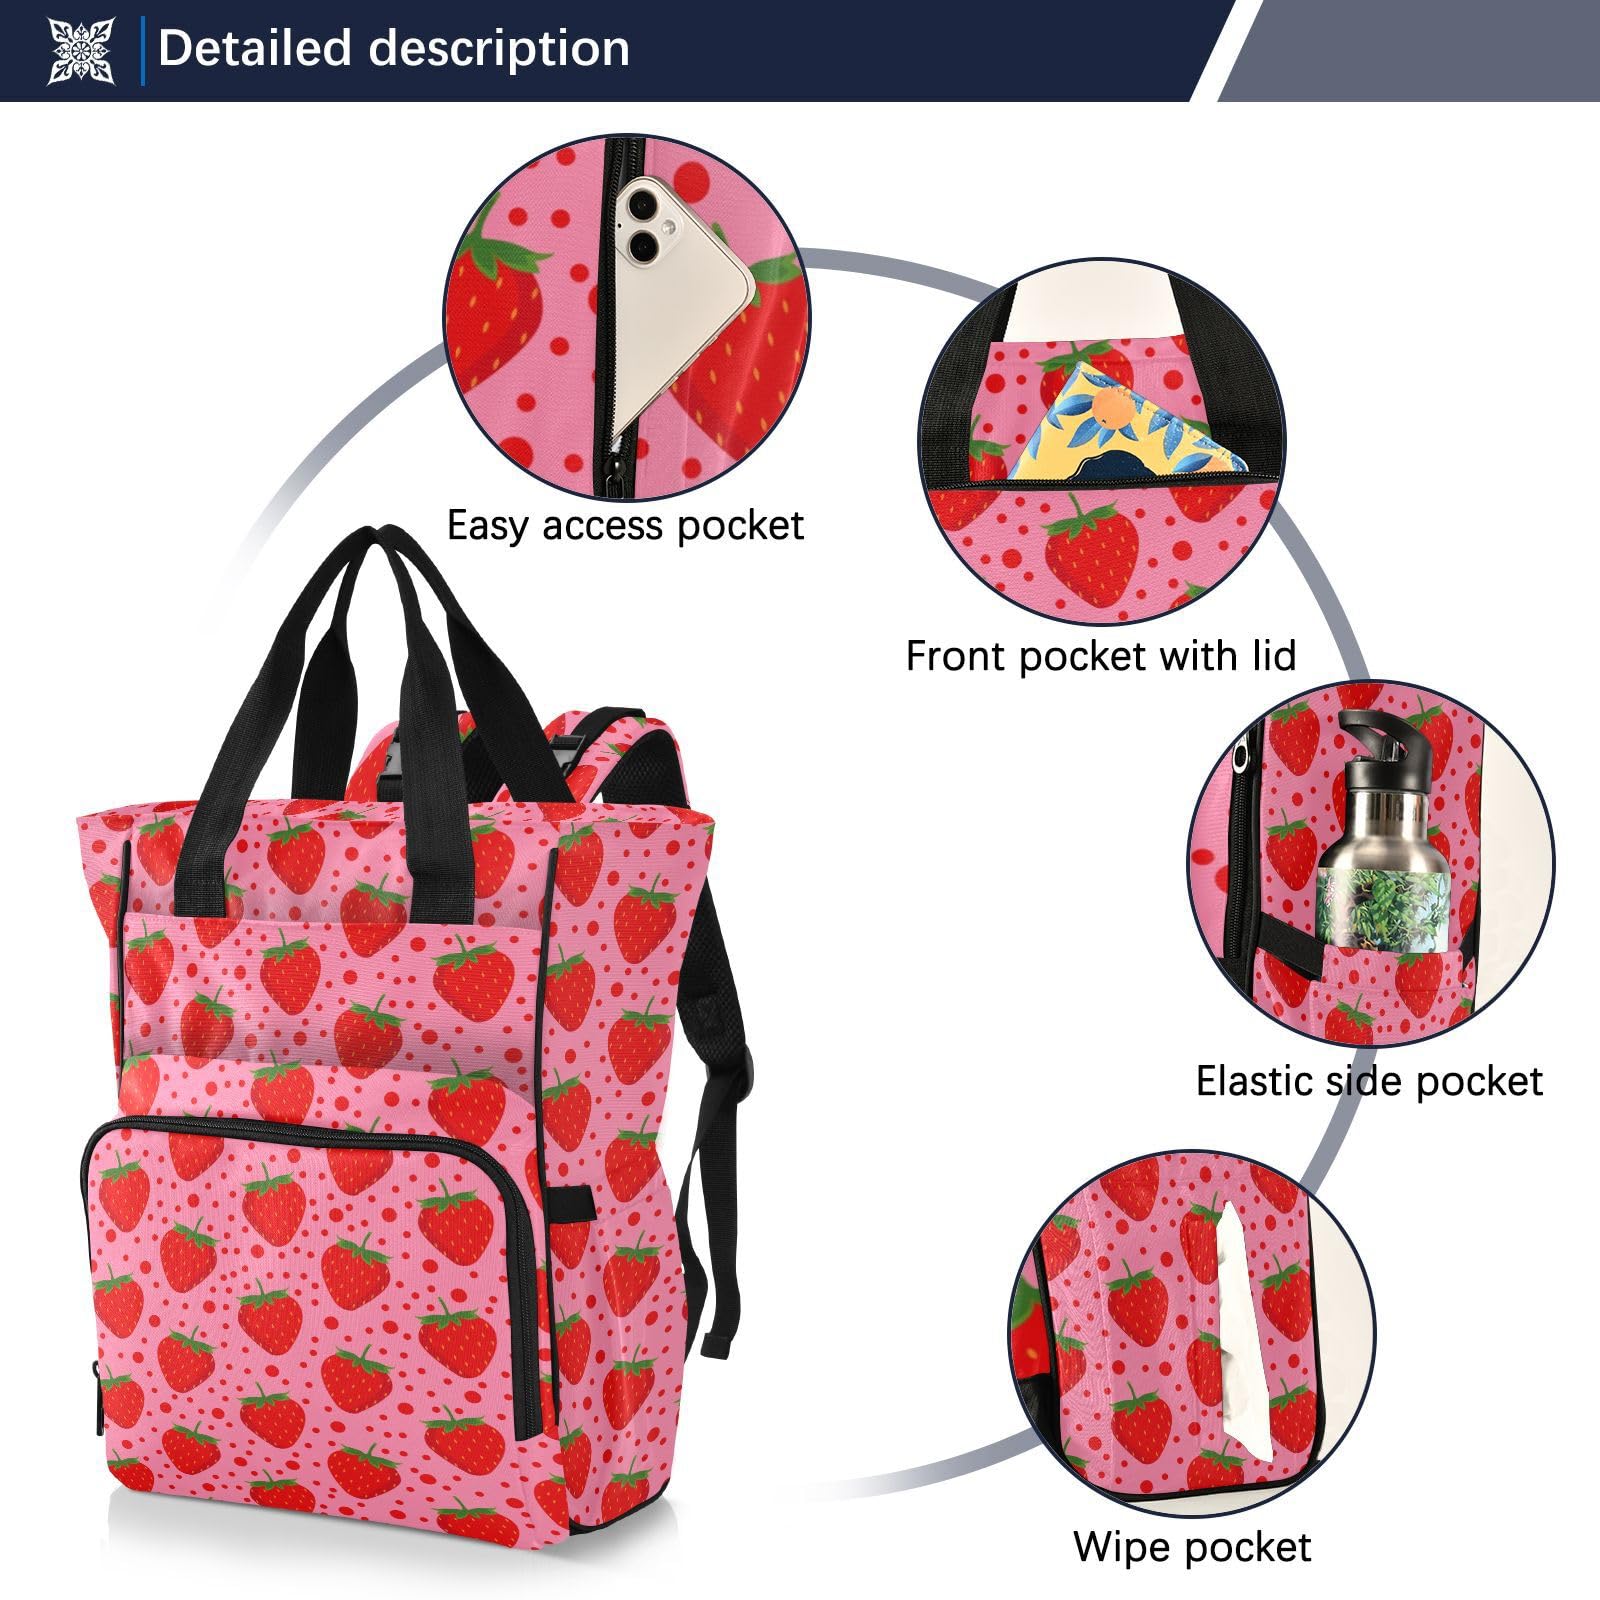 innewgogo Pink Strawberry Dot Diaper Bag Backpack for Men Women Large Capacity Baby Changing Totes with Three Pockets Multifunction Travel Baby Bag for Travelling